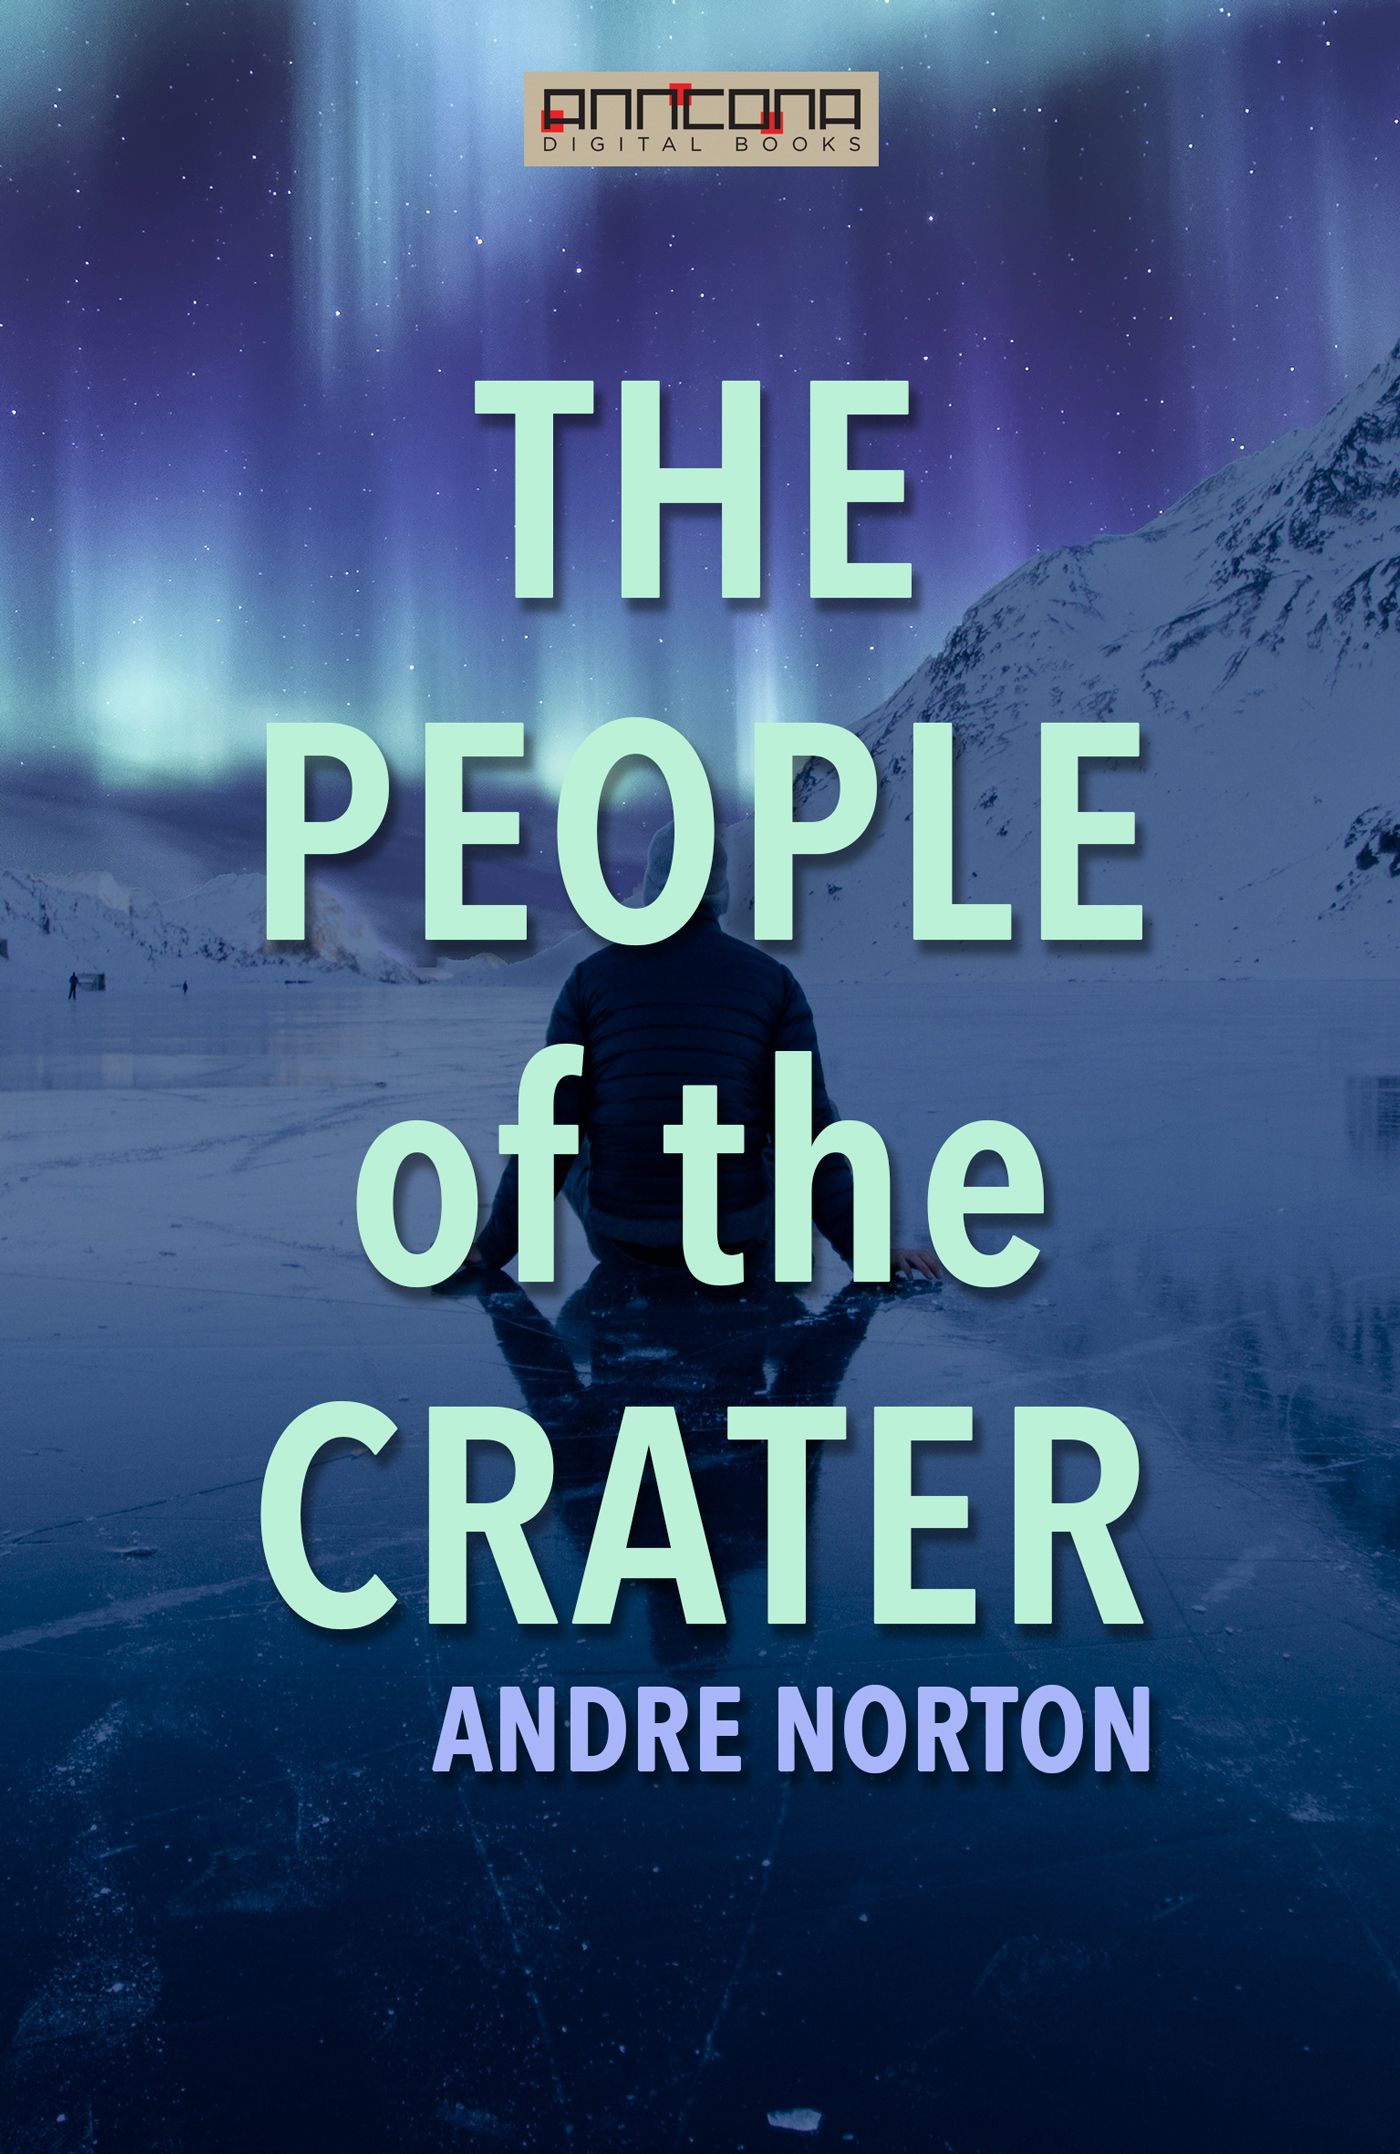 The People of the Crater, e-bok av Andre Norton